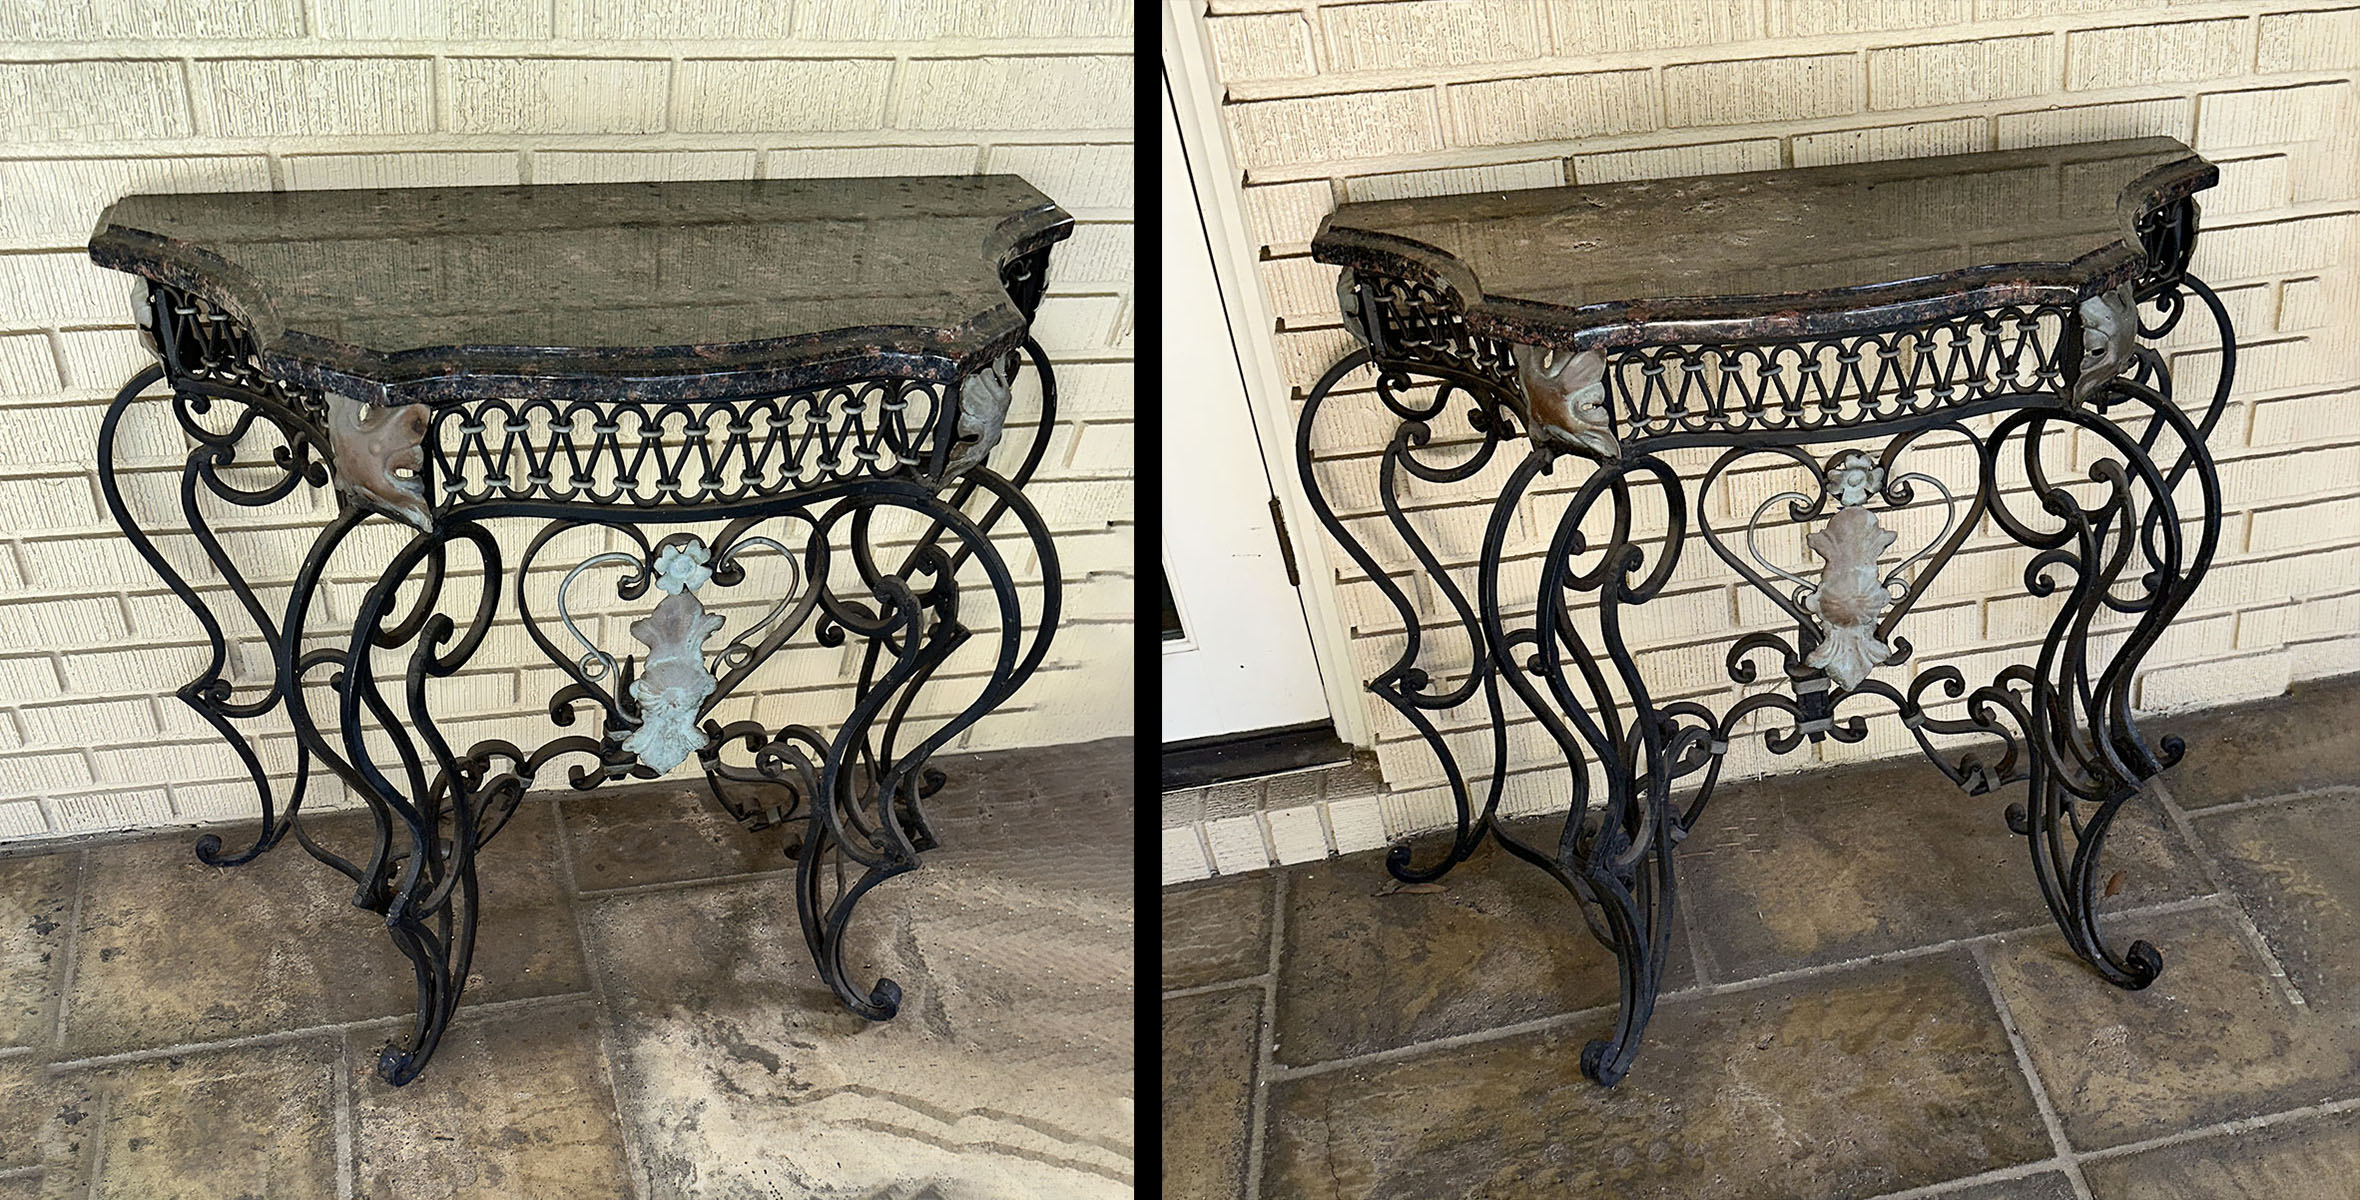 PAIR OF MARBLE TOP WROUGHT IRON